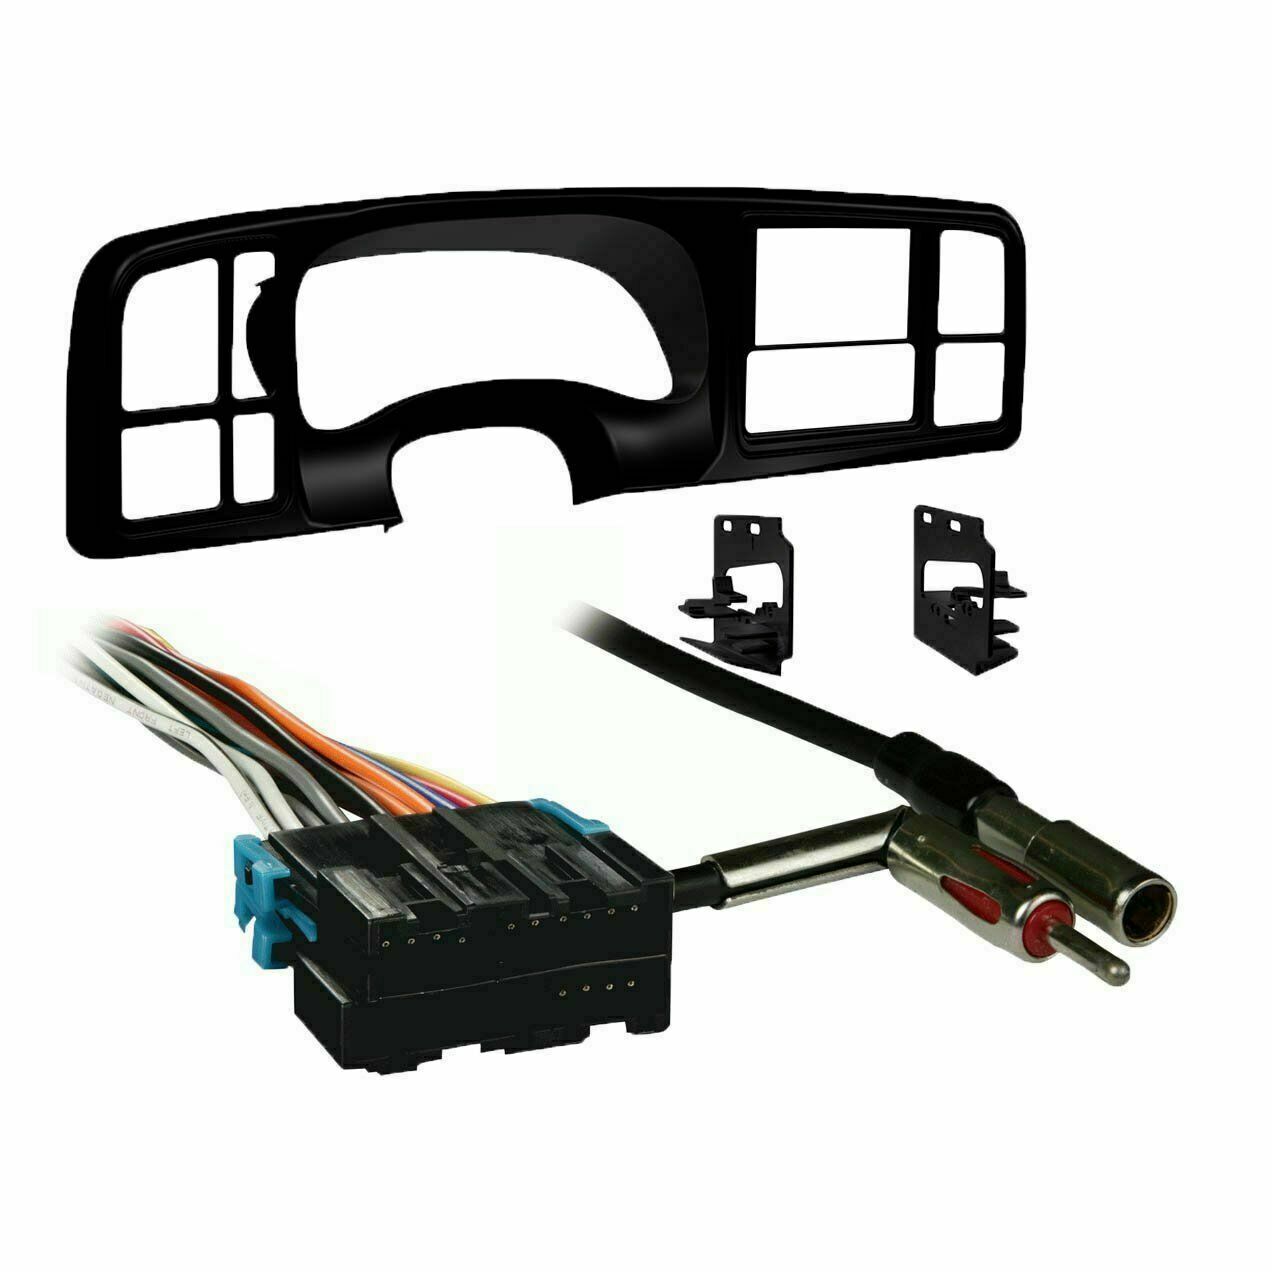 Metra Double DIN Car Stereo Radio Install Dash Kit for 99-2002 Silverado/Sierra with Wiring and Antenna Connections